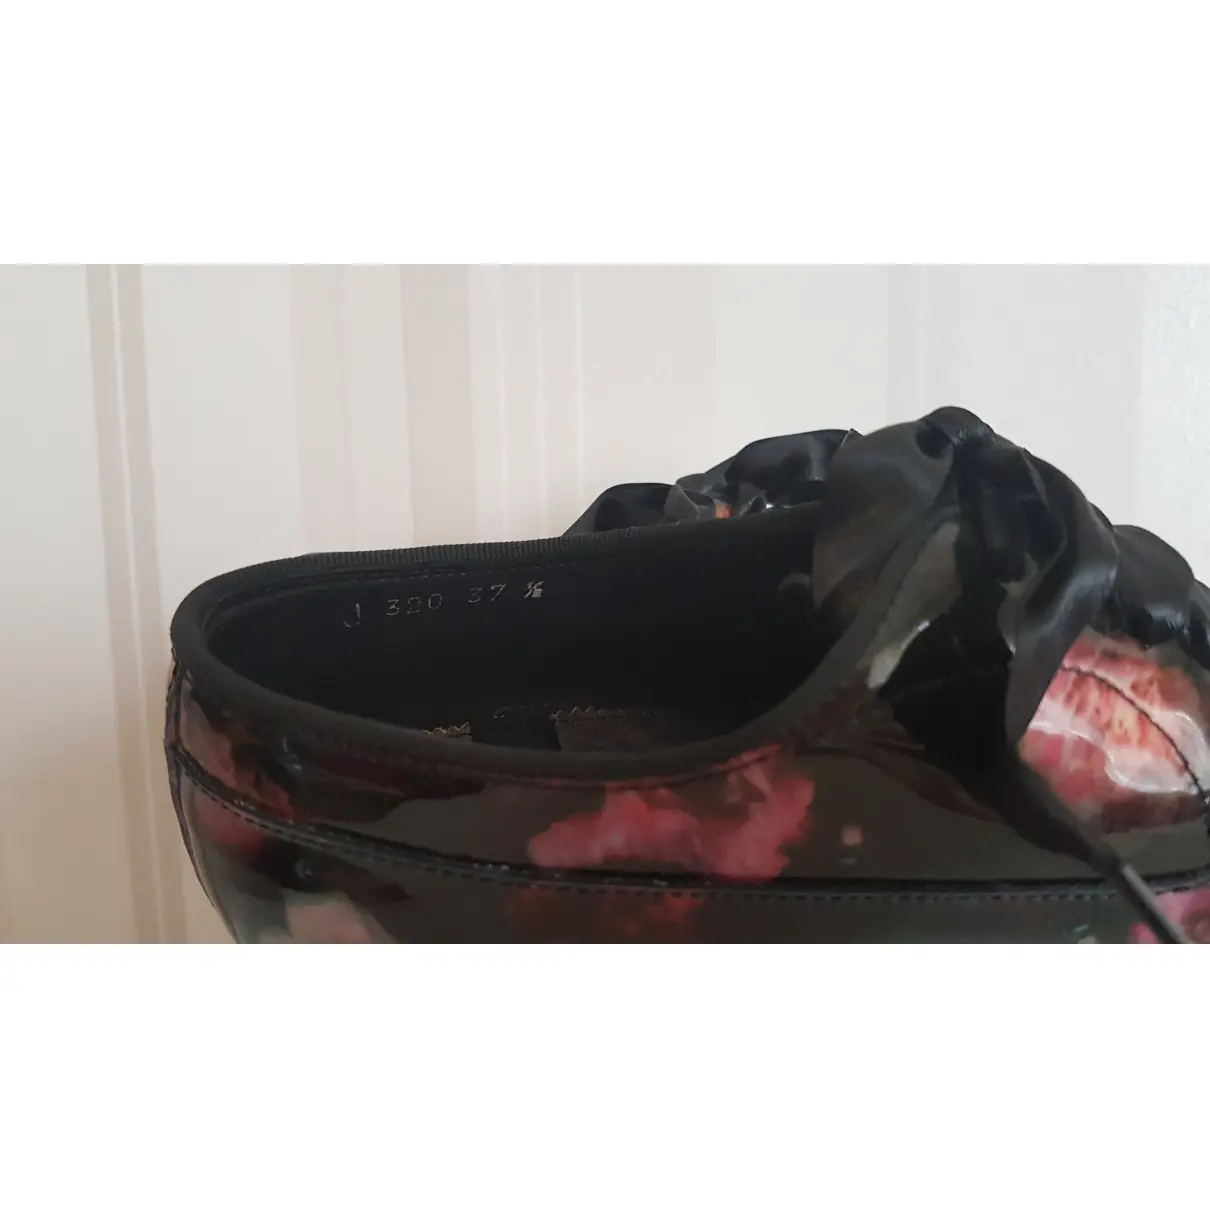 Patent leather flats Paul Smith